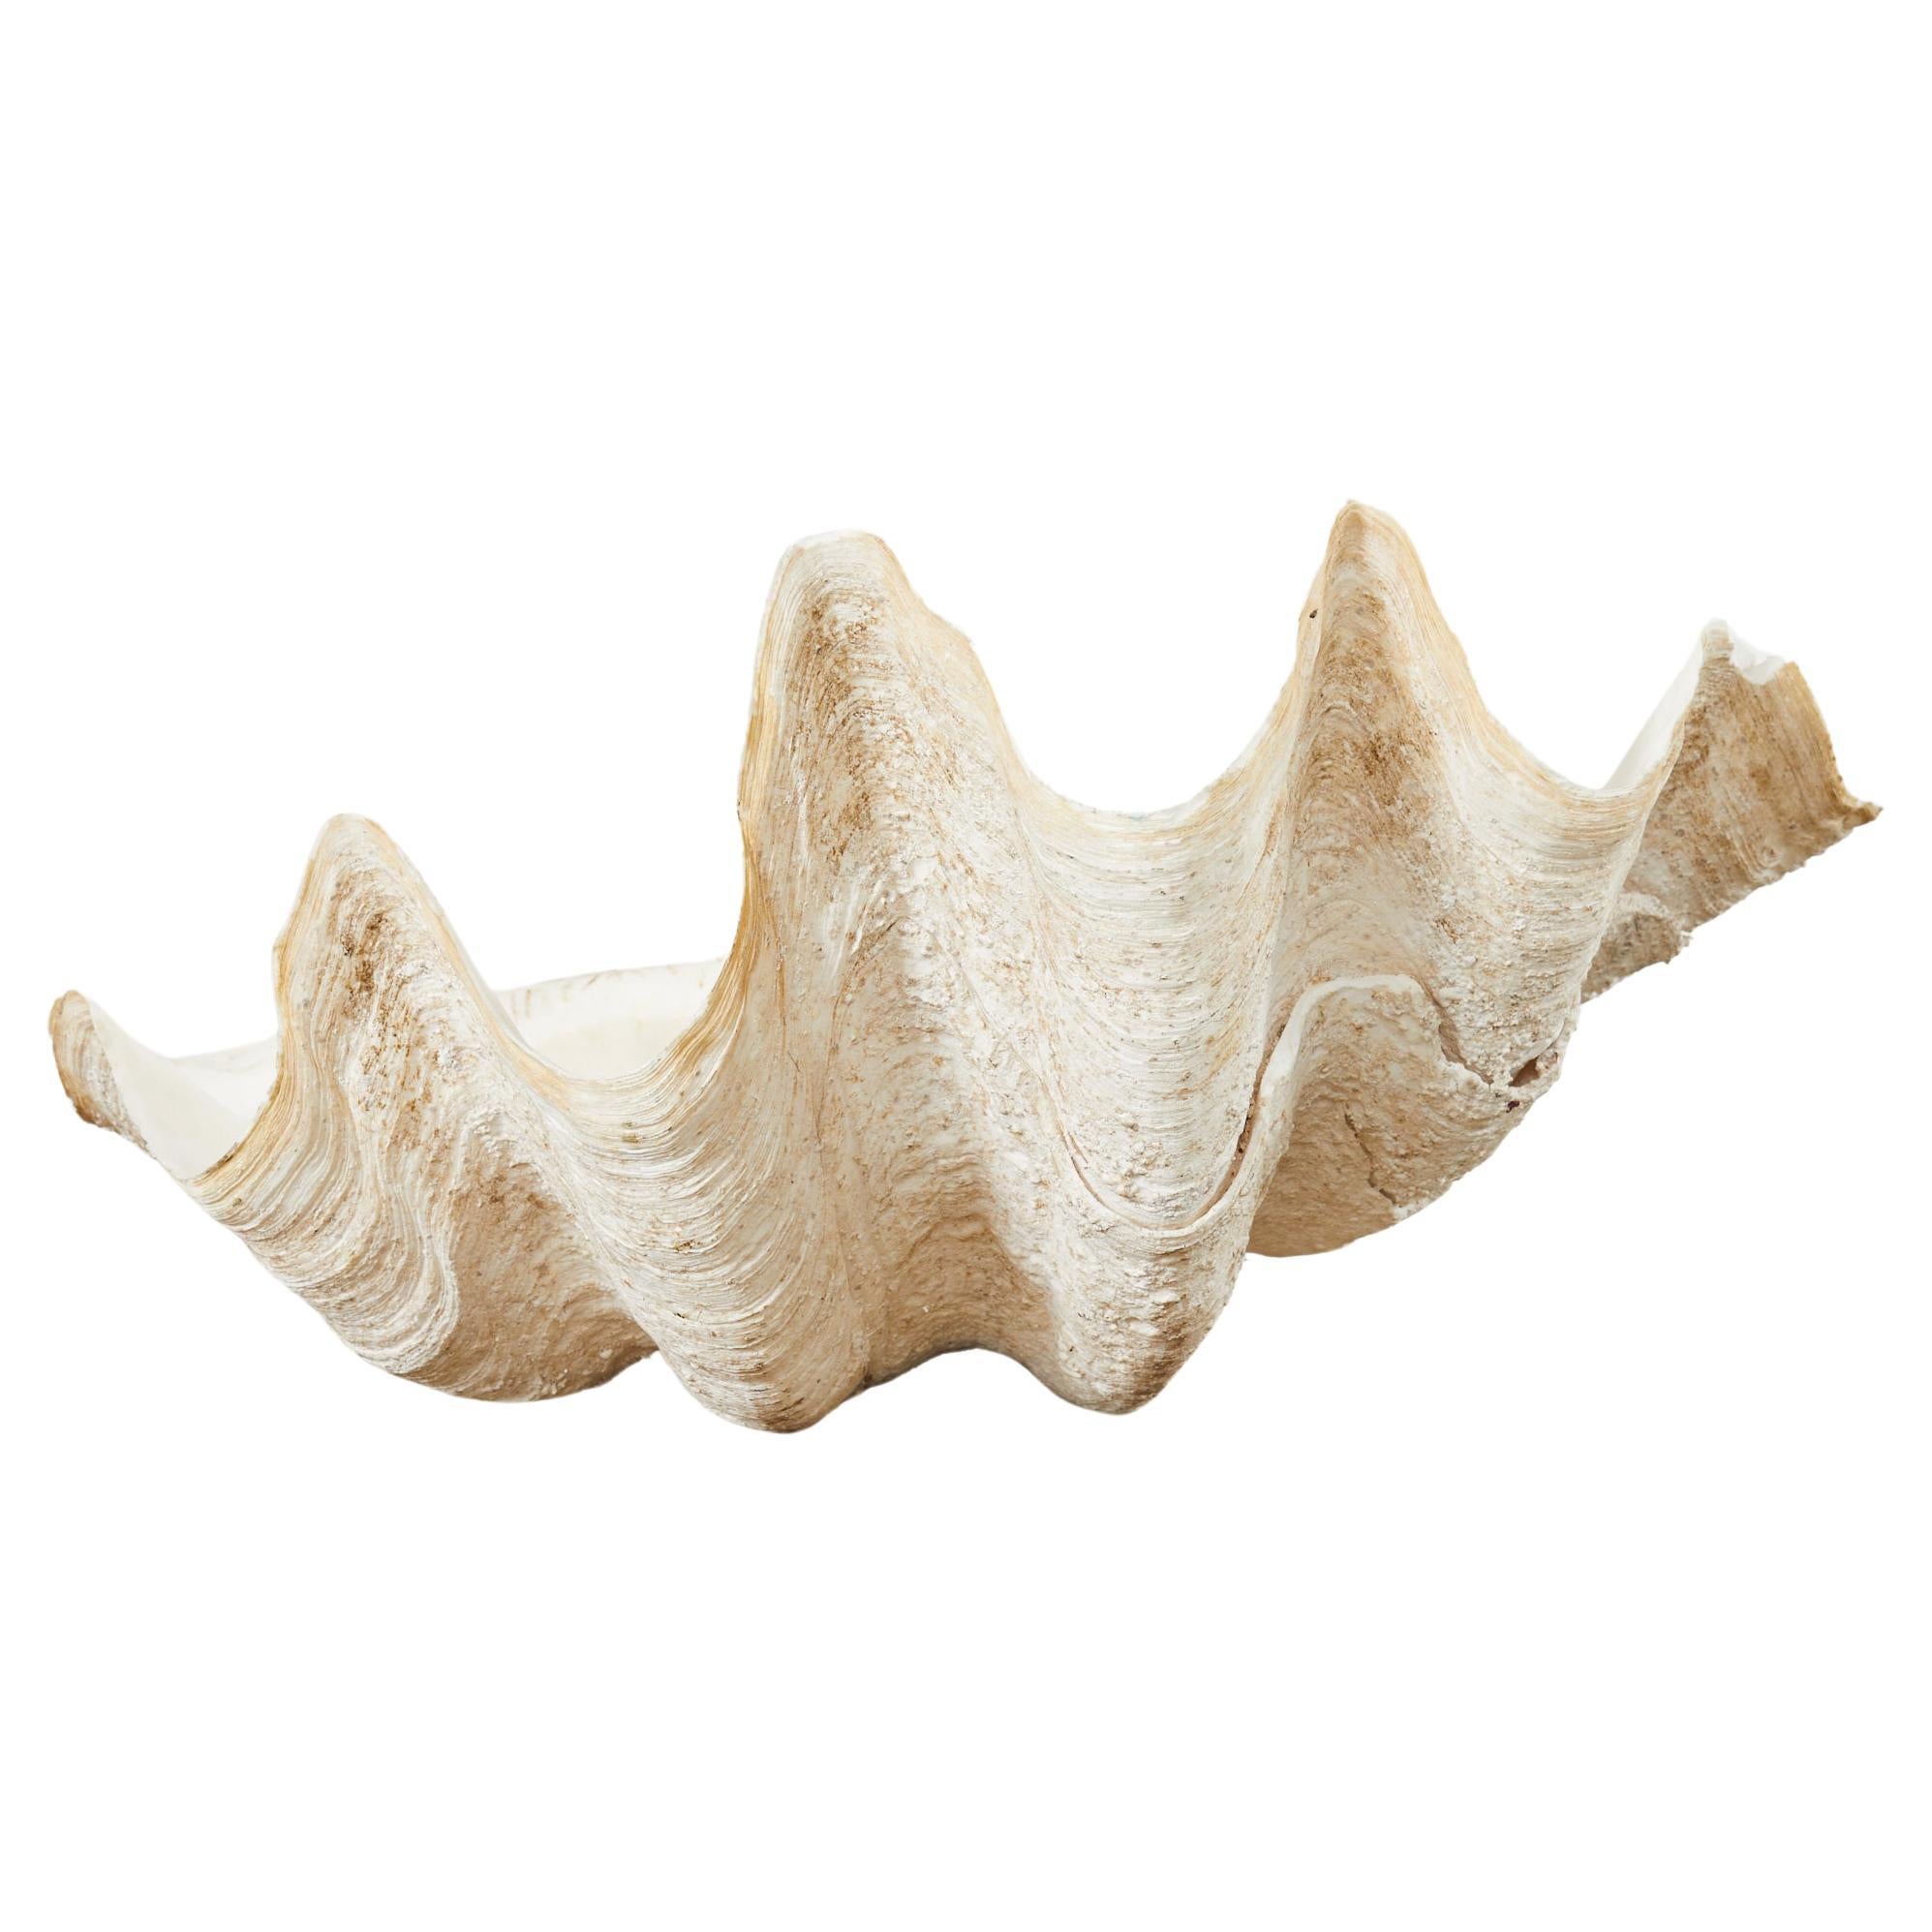 Natural South Pacific Giant Clam Shell Specimen For Sale